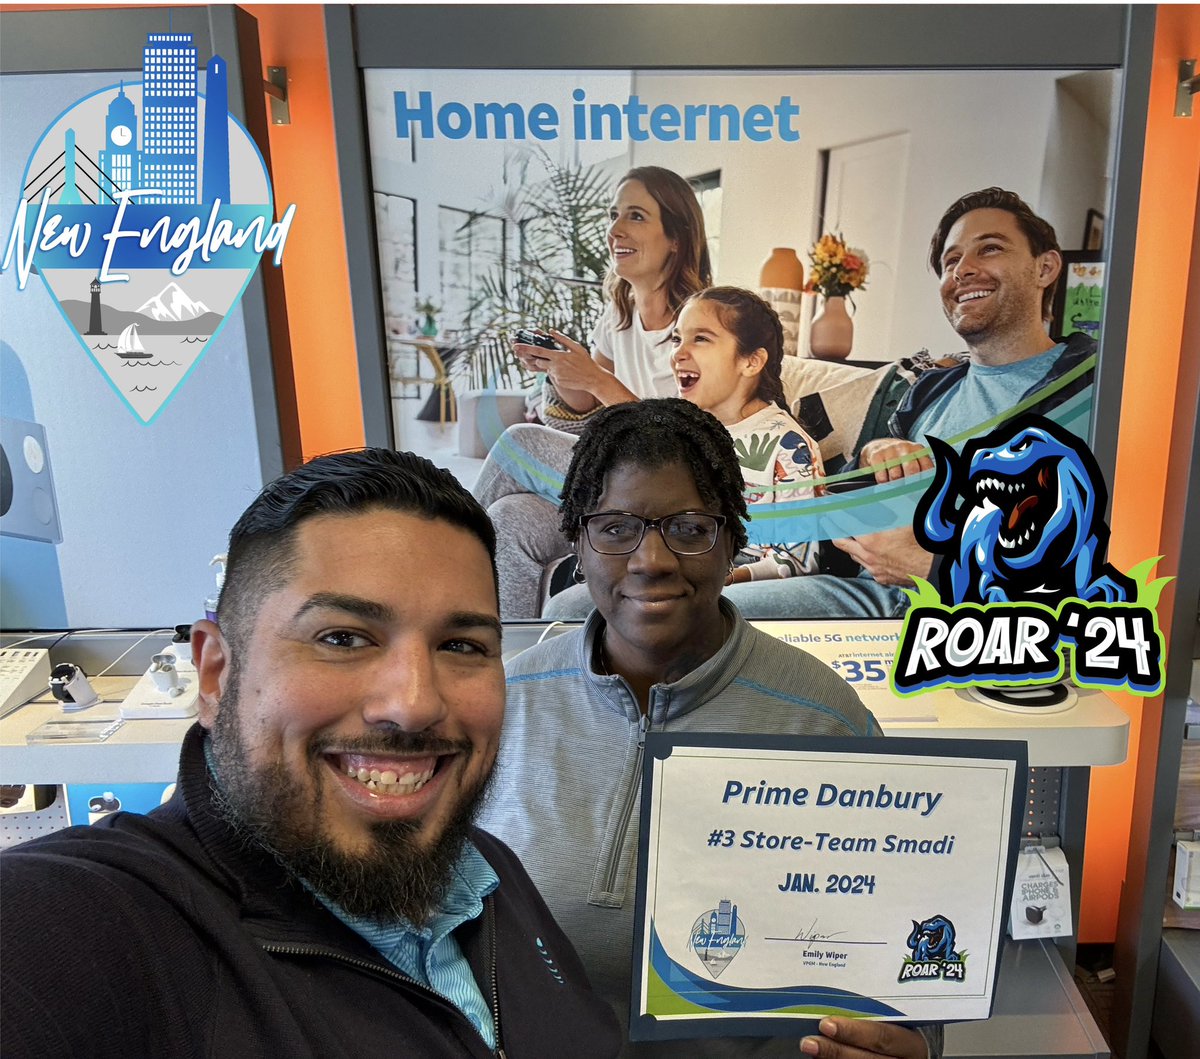 Shoutout to our #Prime pARtners Danbury for finishing as one of the top locations on Team HurricaNE for January 2024! #Roar24 #wiNEverything @firas_smadi @emilywiper @TheRealOurNE @CarlosALoaiza13